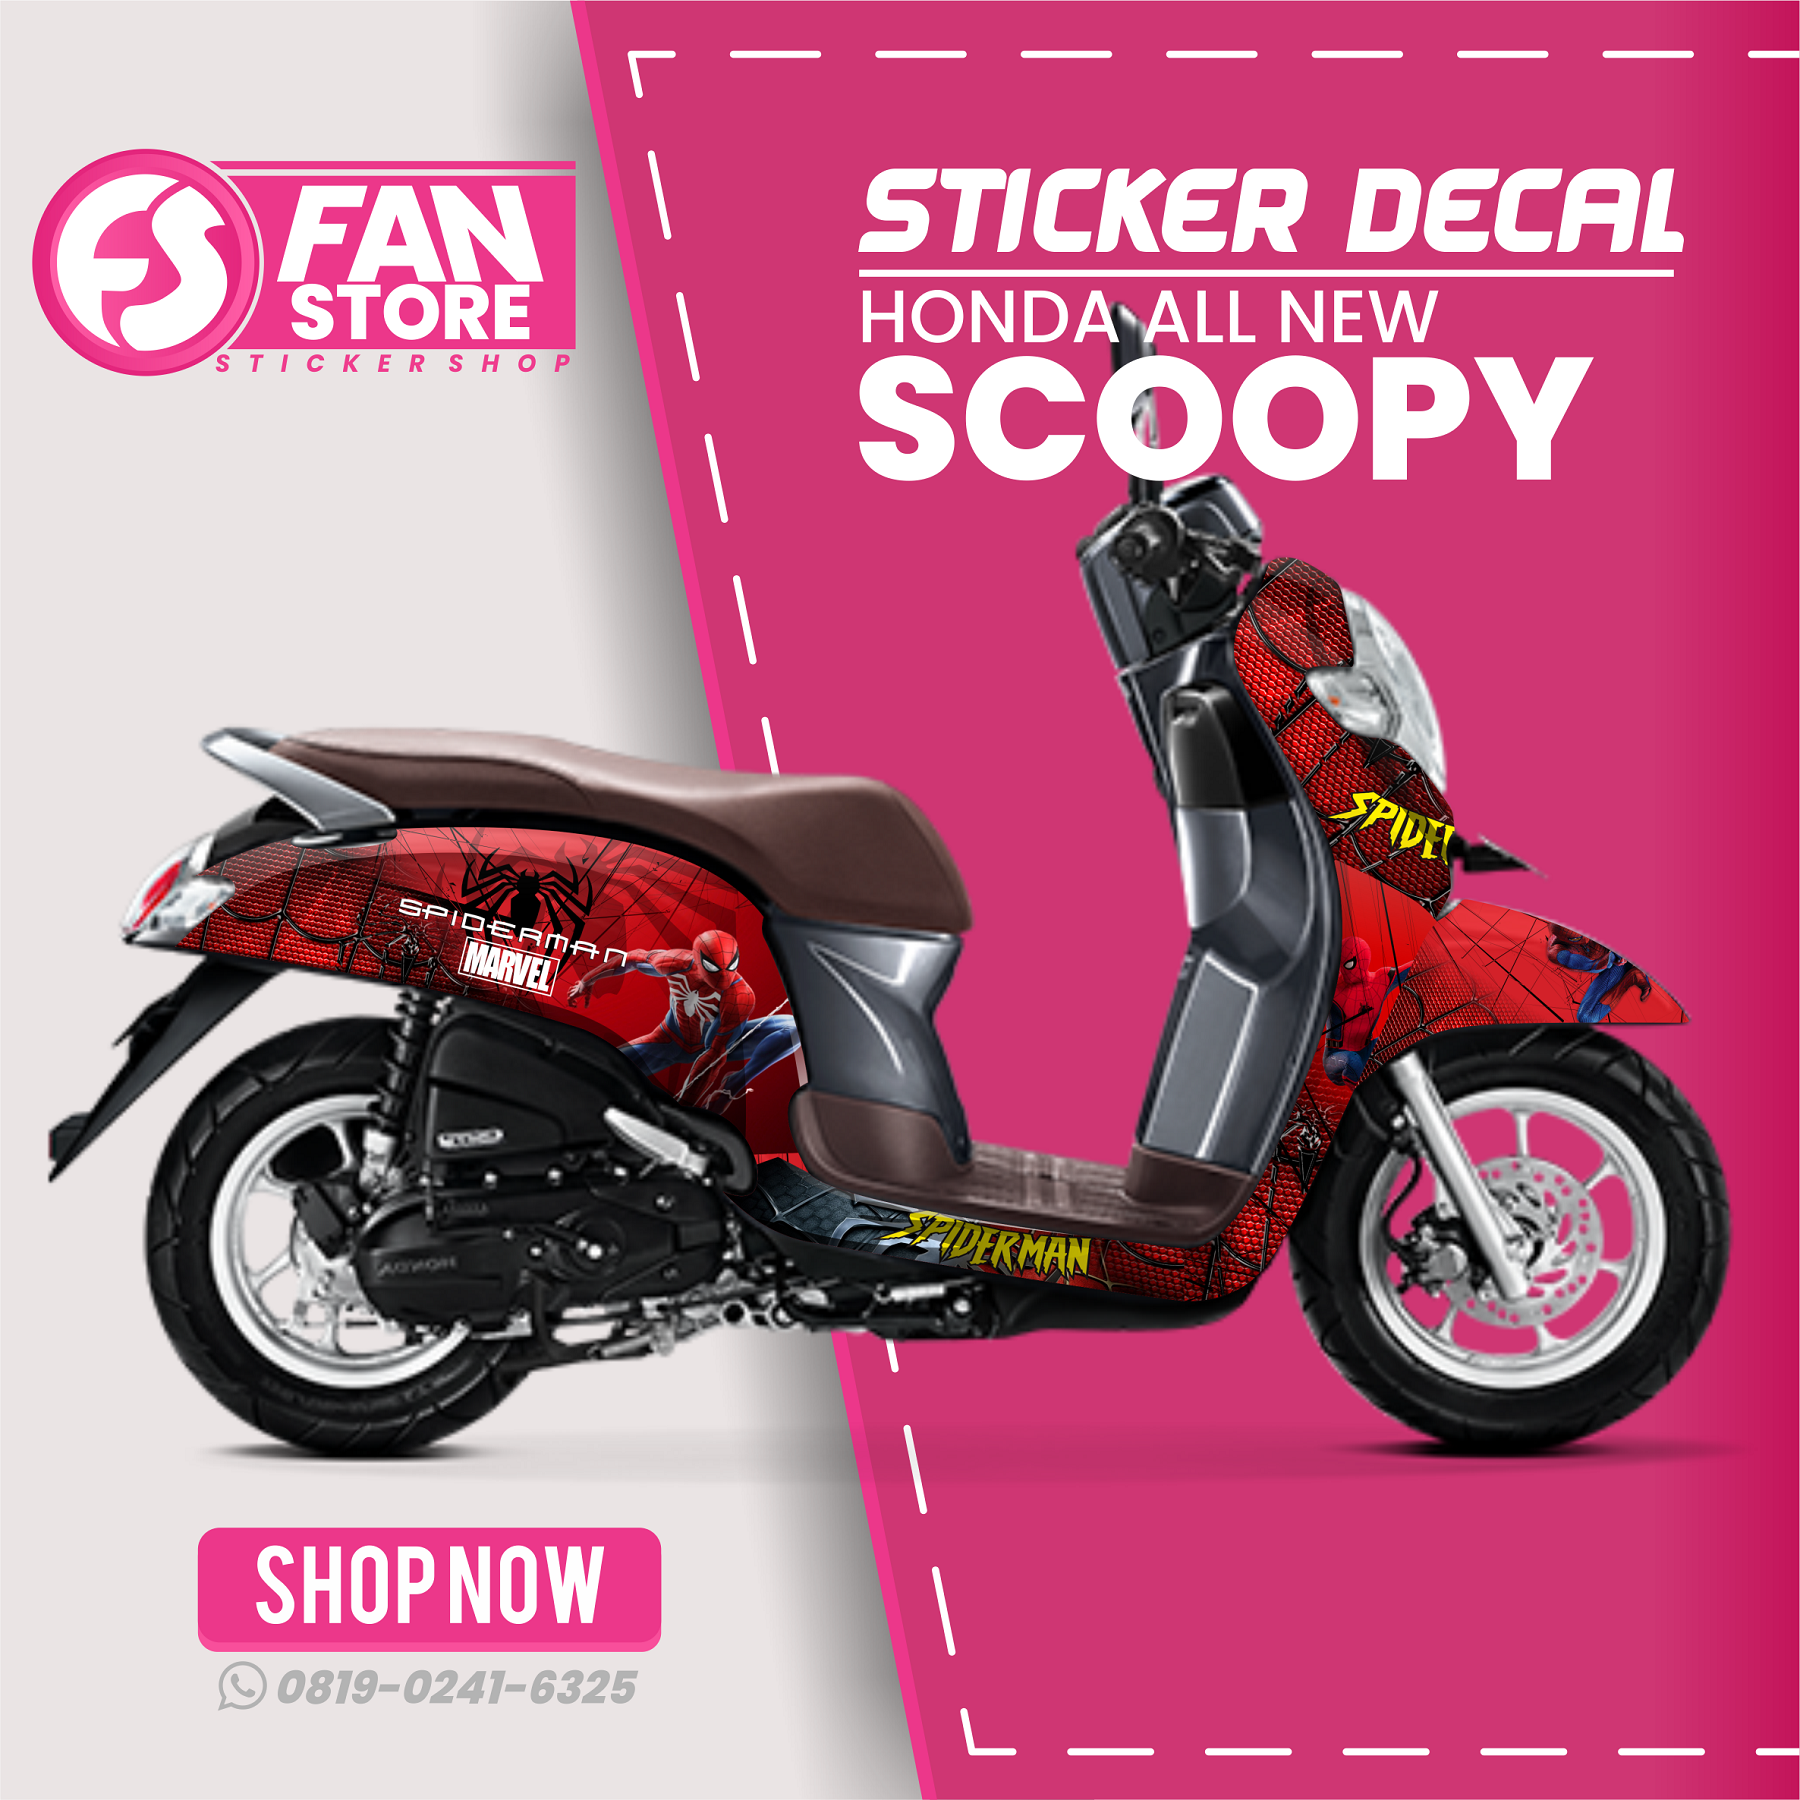 Sticker Decal Honda All New Scoopy Full Body SPIDERMAN Decal